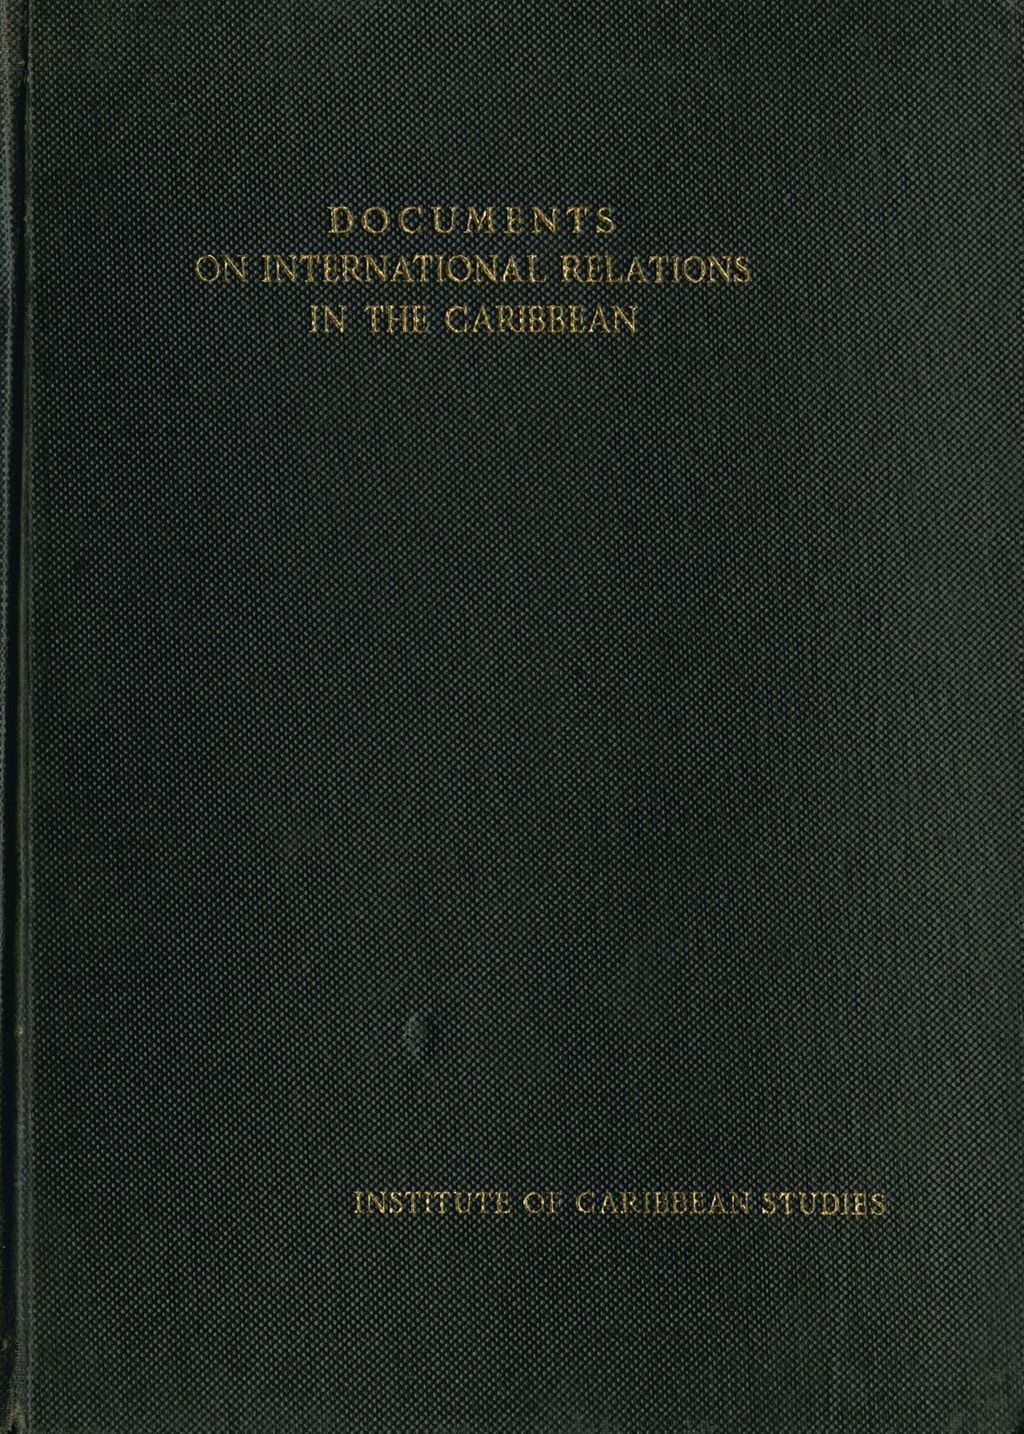 Miniature of Documents on international relations in the Caribbean (front cover)